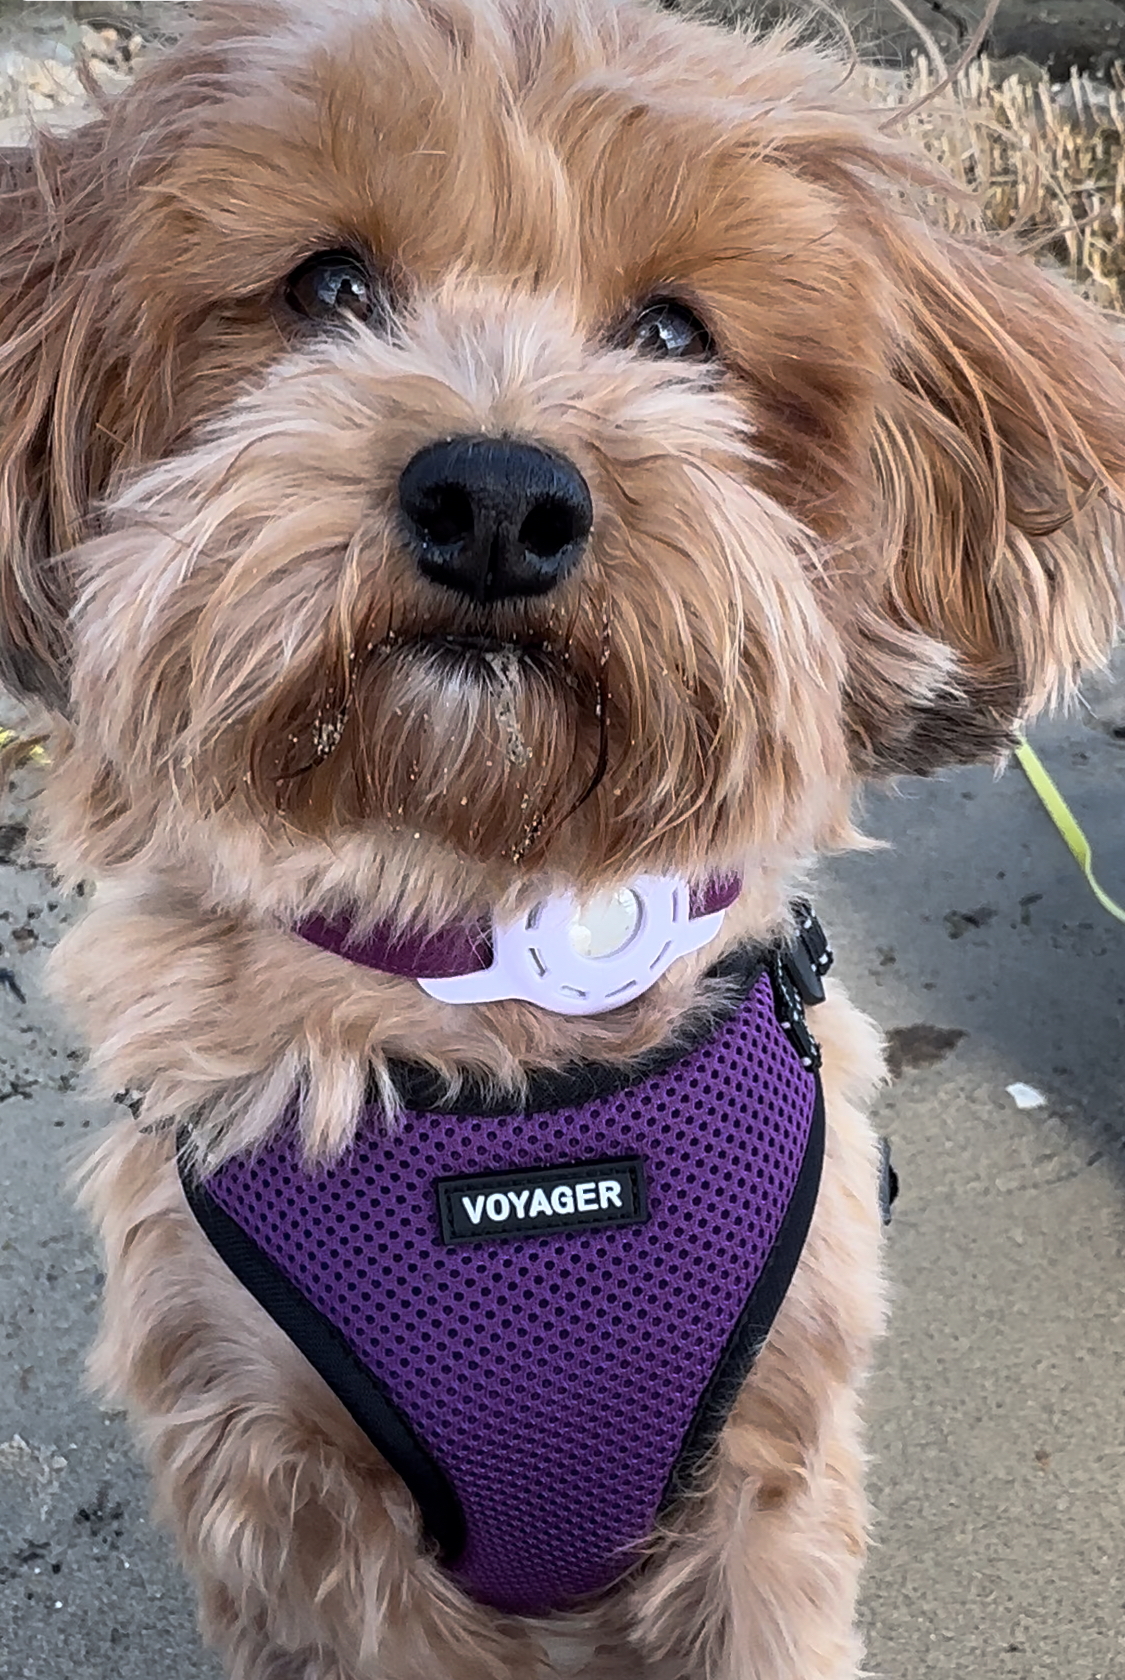 Red Havanese on beach with sandy snout and coordinated purple harness and collar